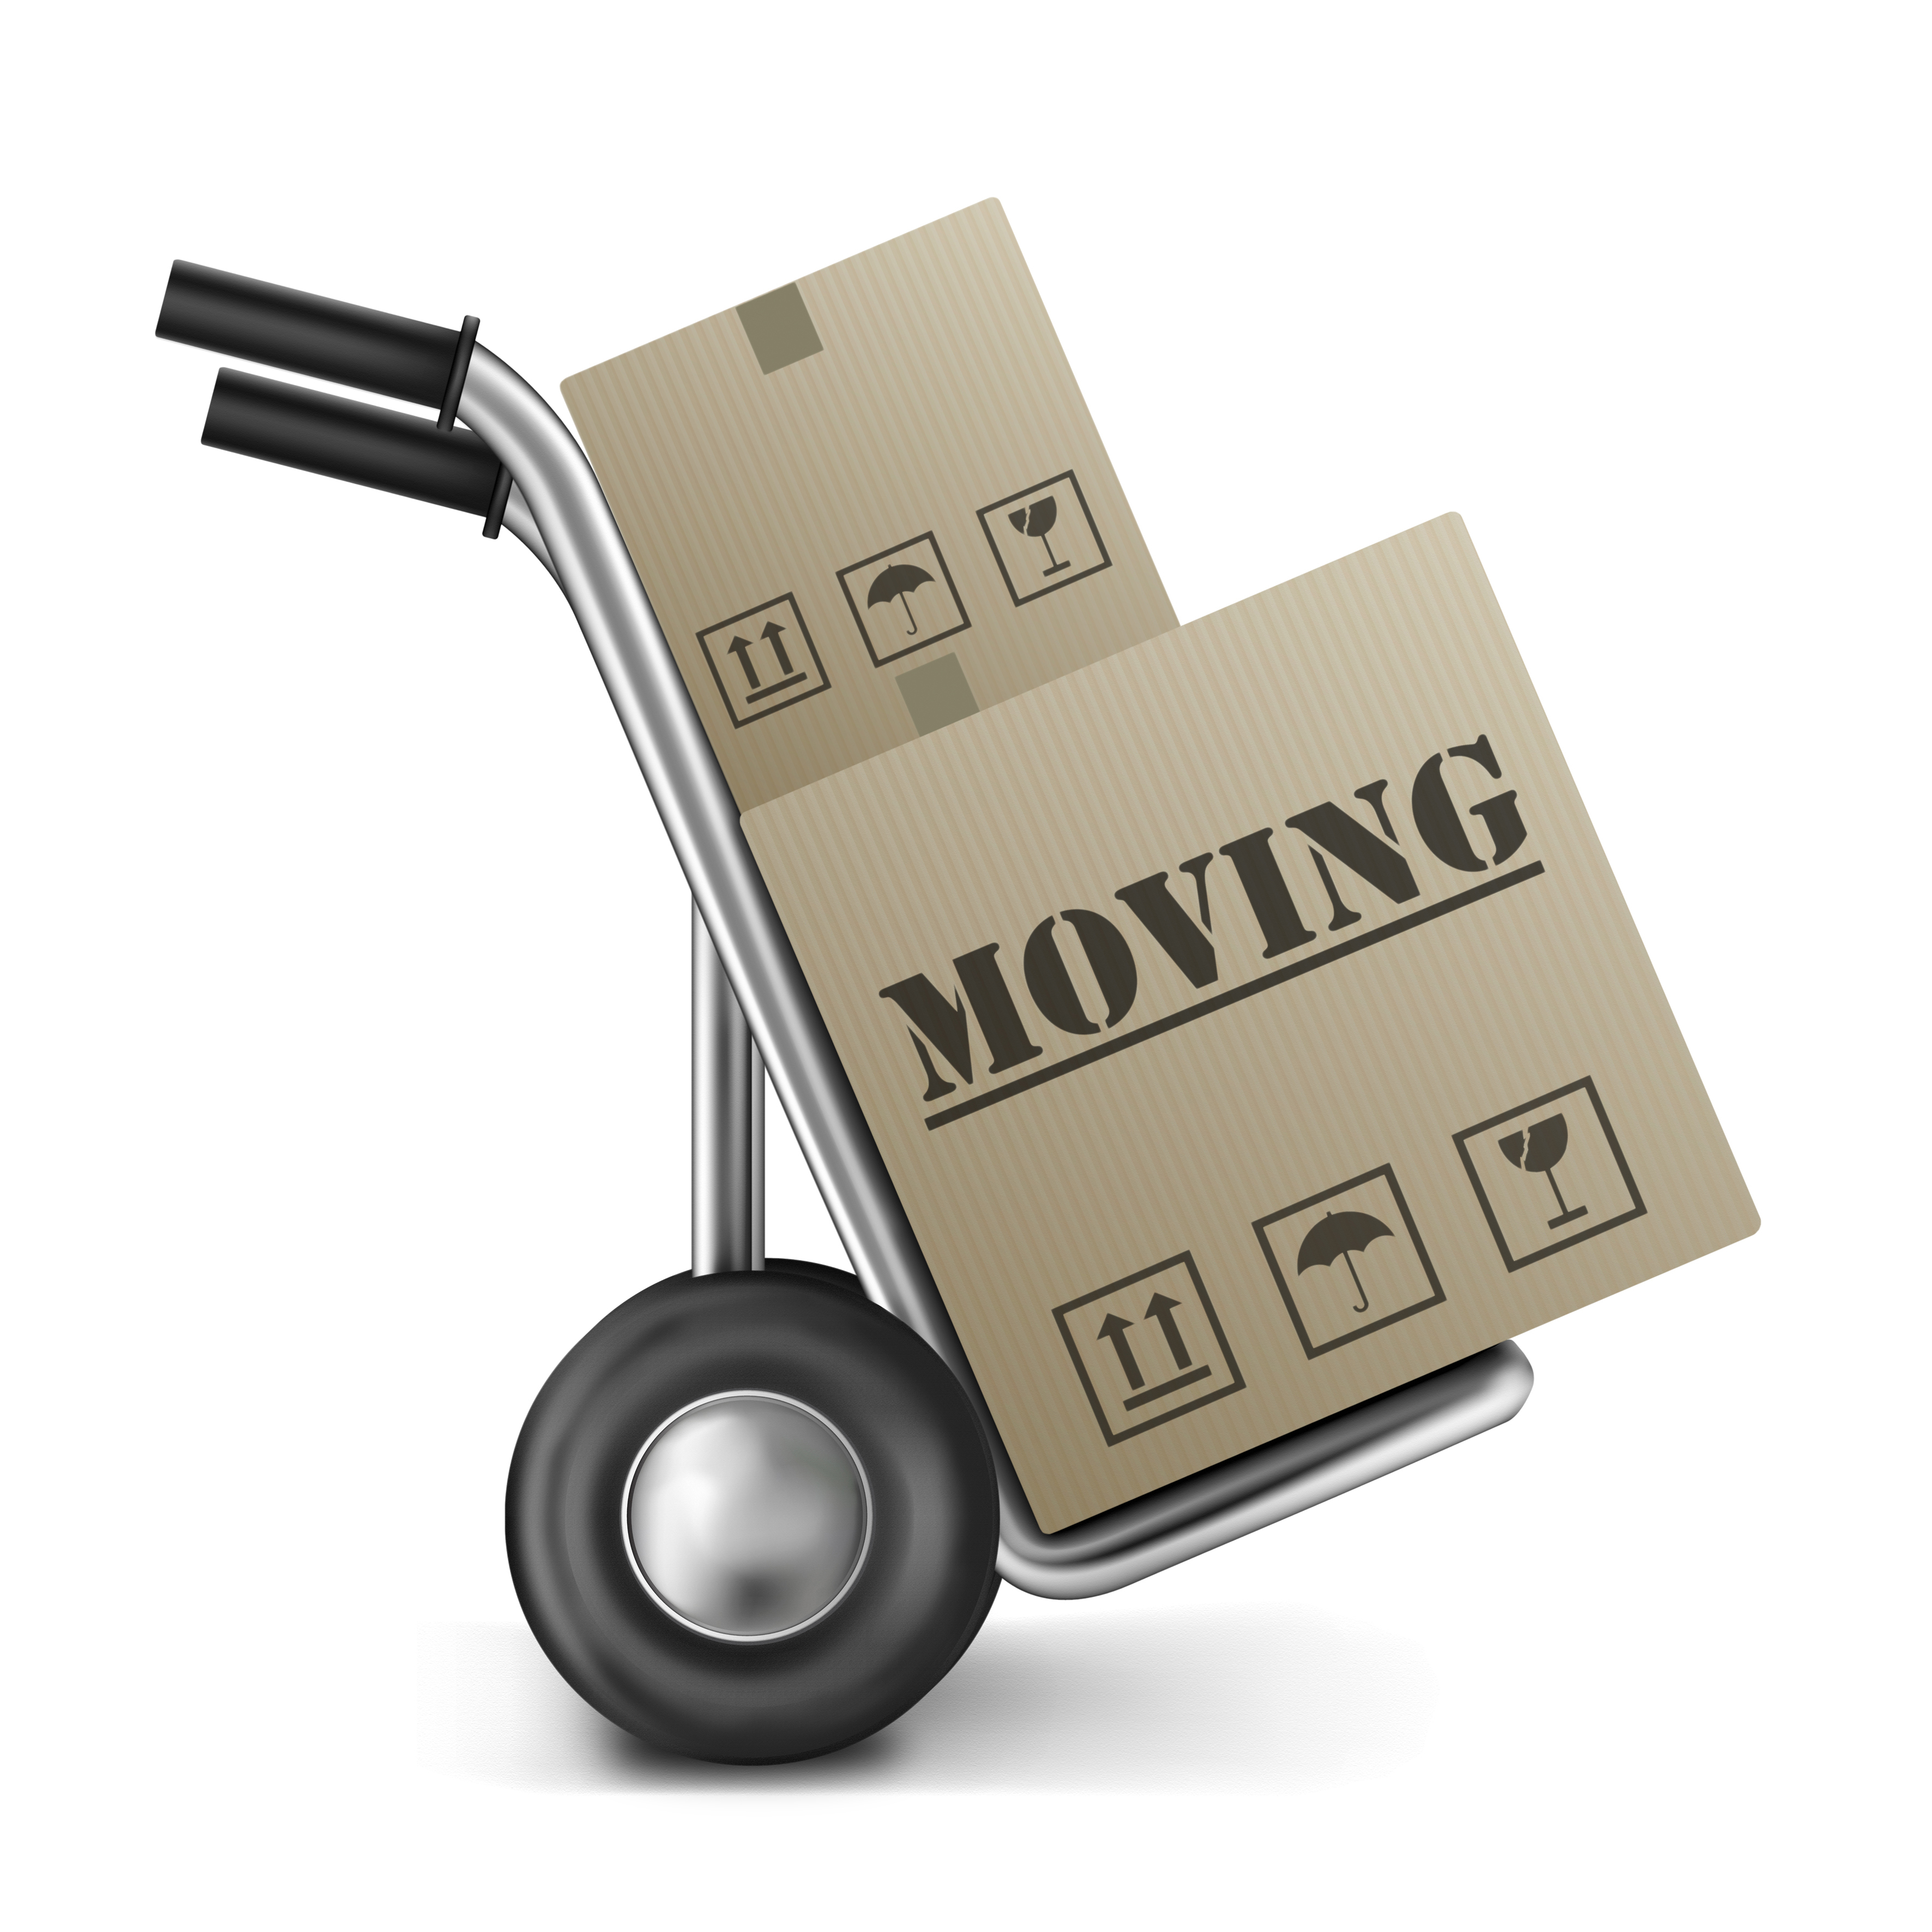 Moving and handling